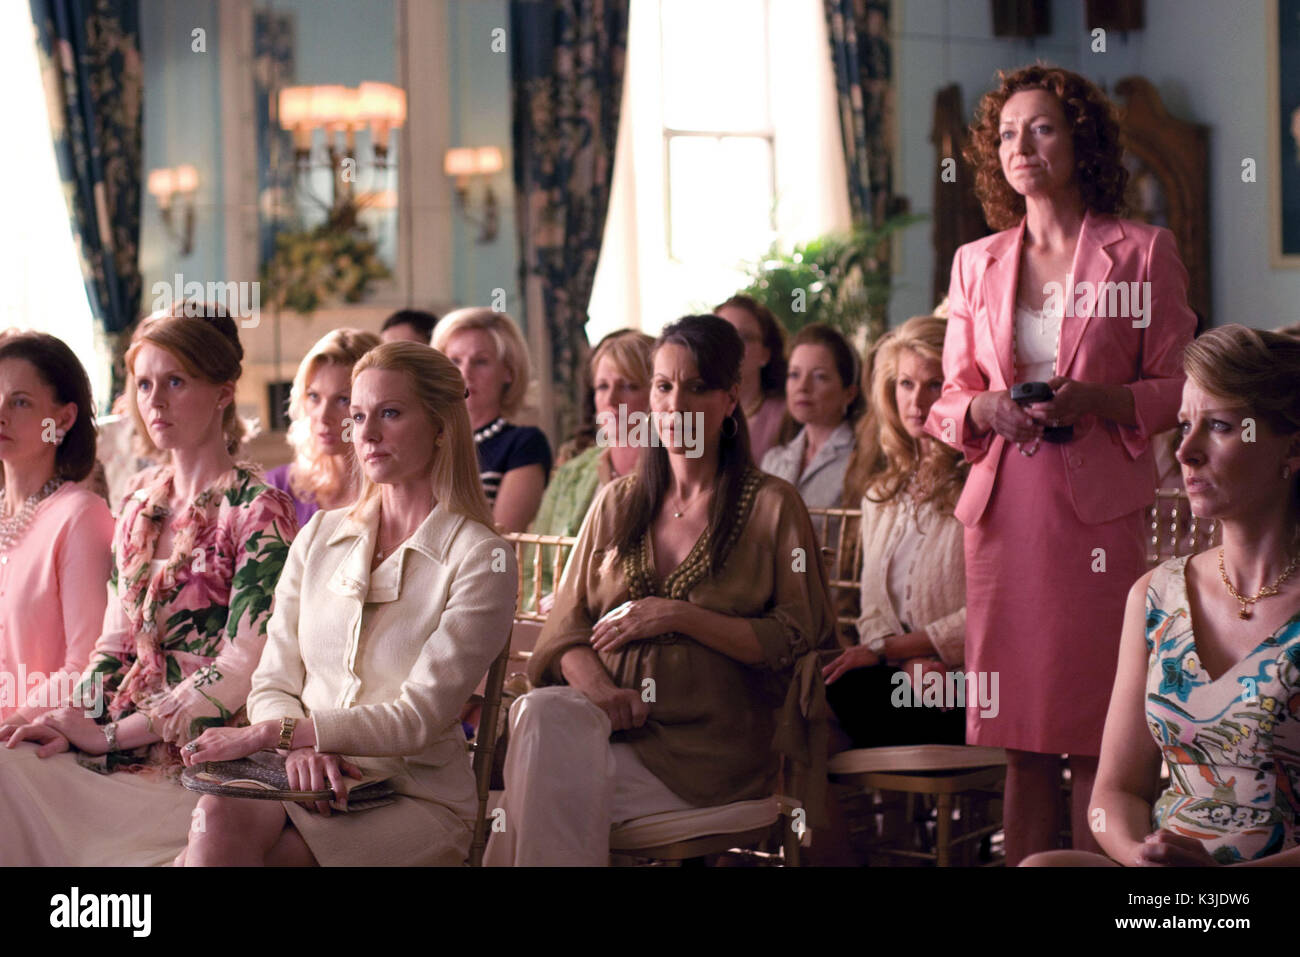 THE NANNY DIARIES LAURA LINNEY, JULIE WHITE [standing] THE NANNY DIARIES [US 2007] [3rd from left, seated] LAURA LINNEY, JULIE WHITE [standing]     Date: 2007 Stock Photo